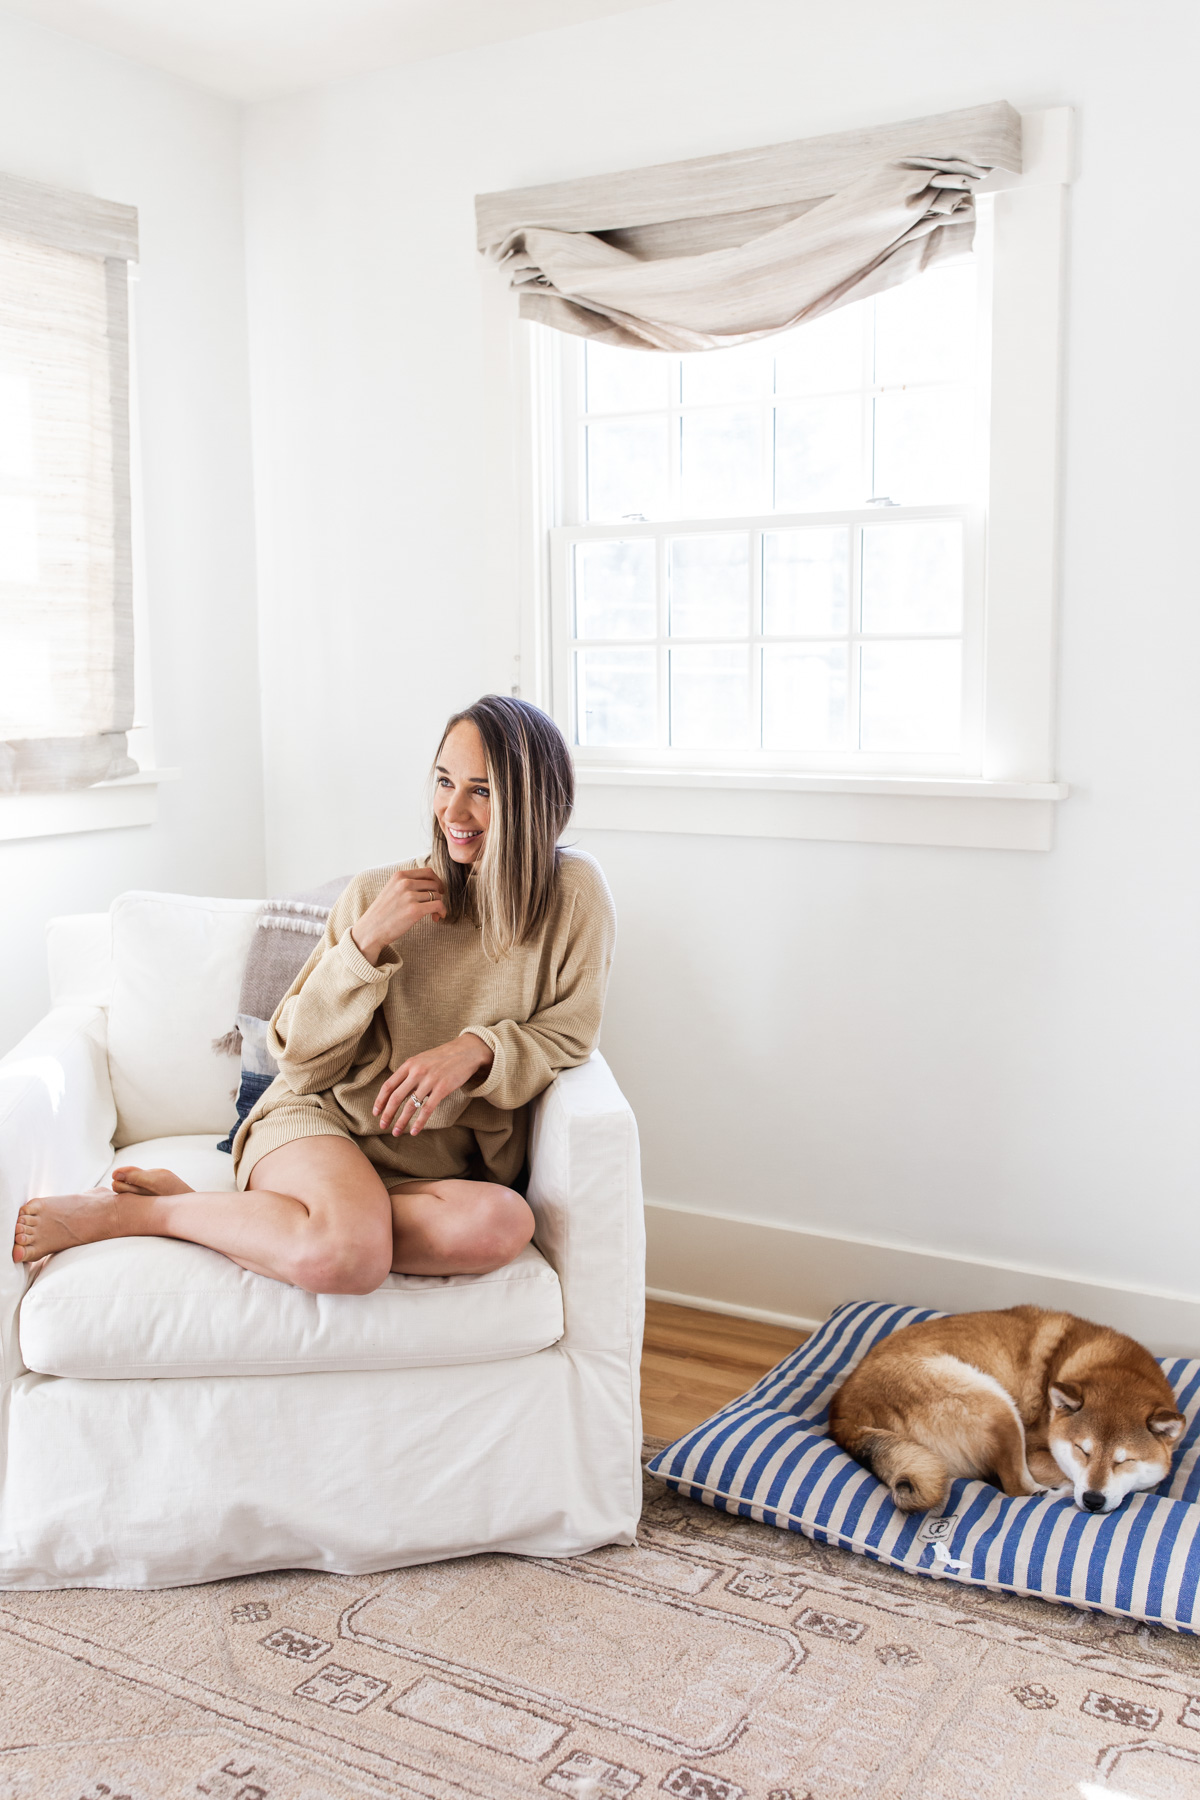 3 Easy Morning Rituals for a Better Day